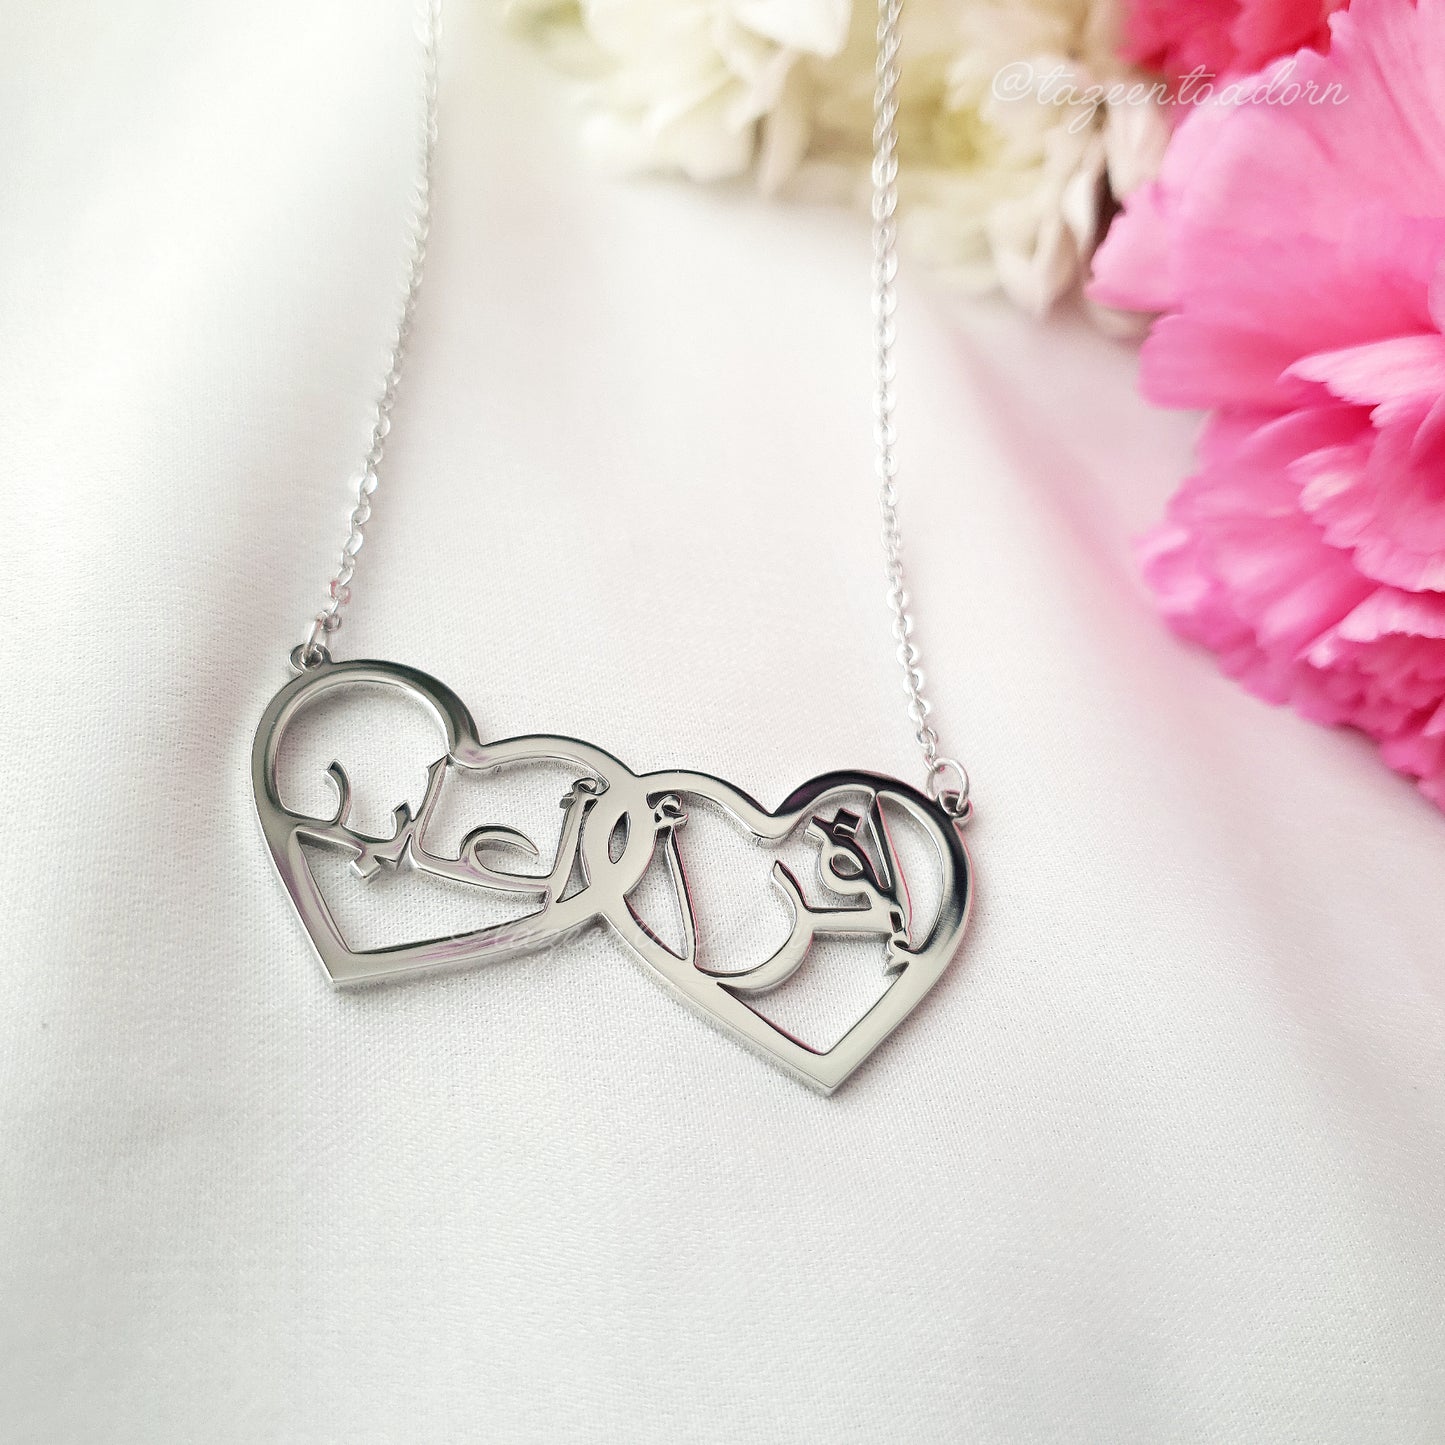 Personalised Custom Two Double Name Hearts Necklace - Couple His & Hers, BFF, Sibling Jewellery Gift - FARA